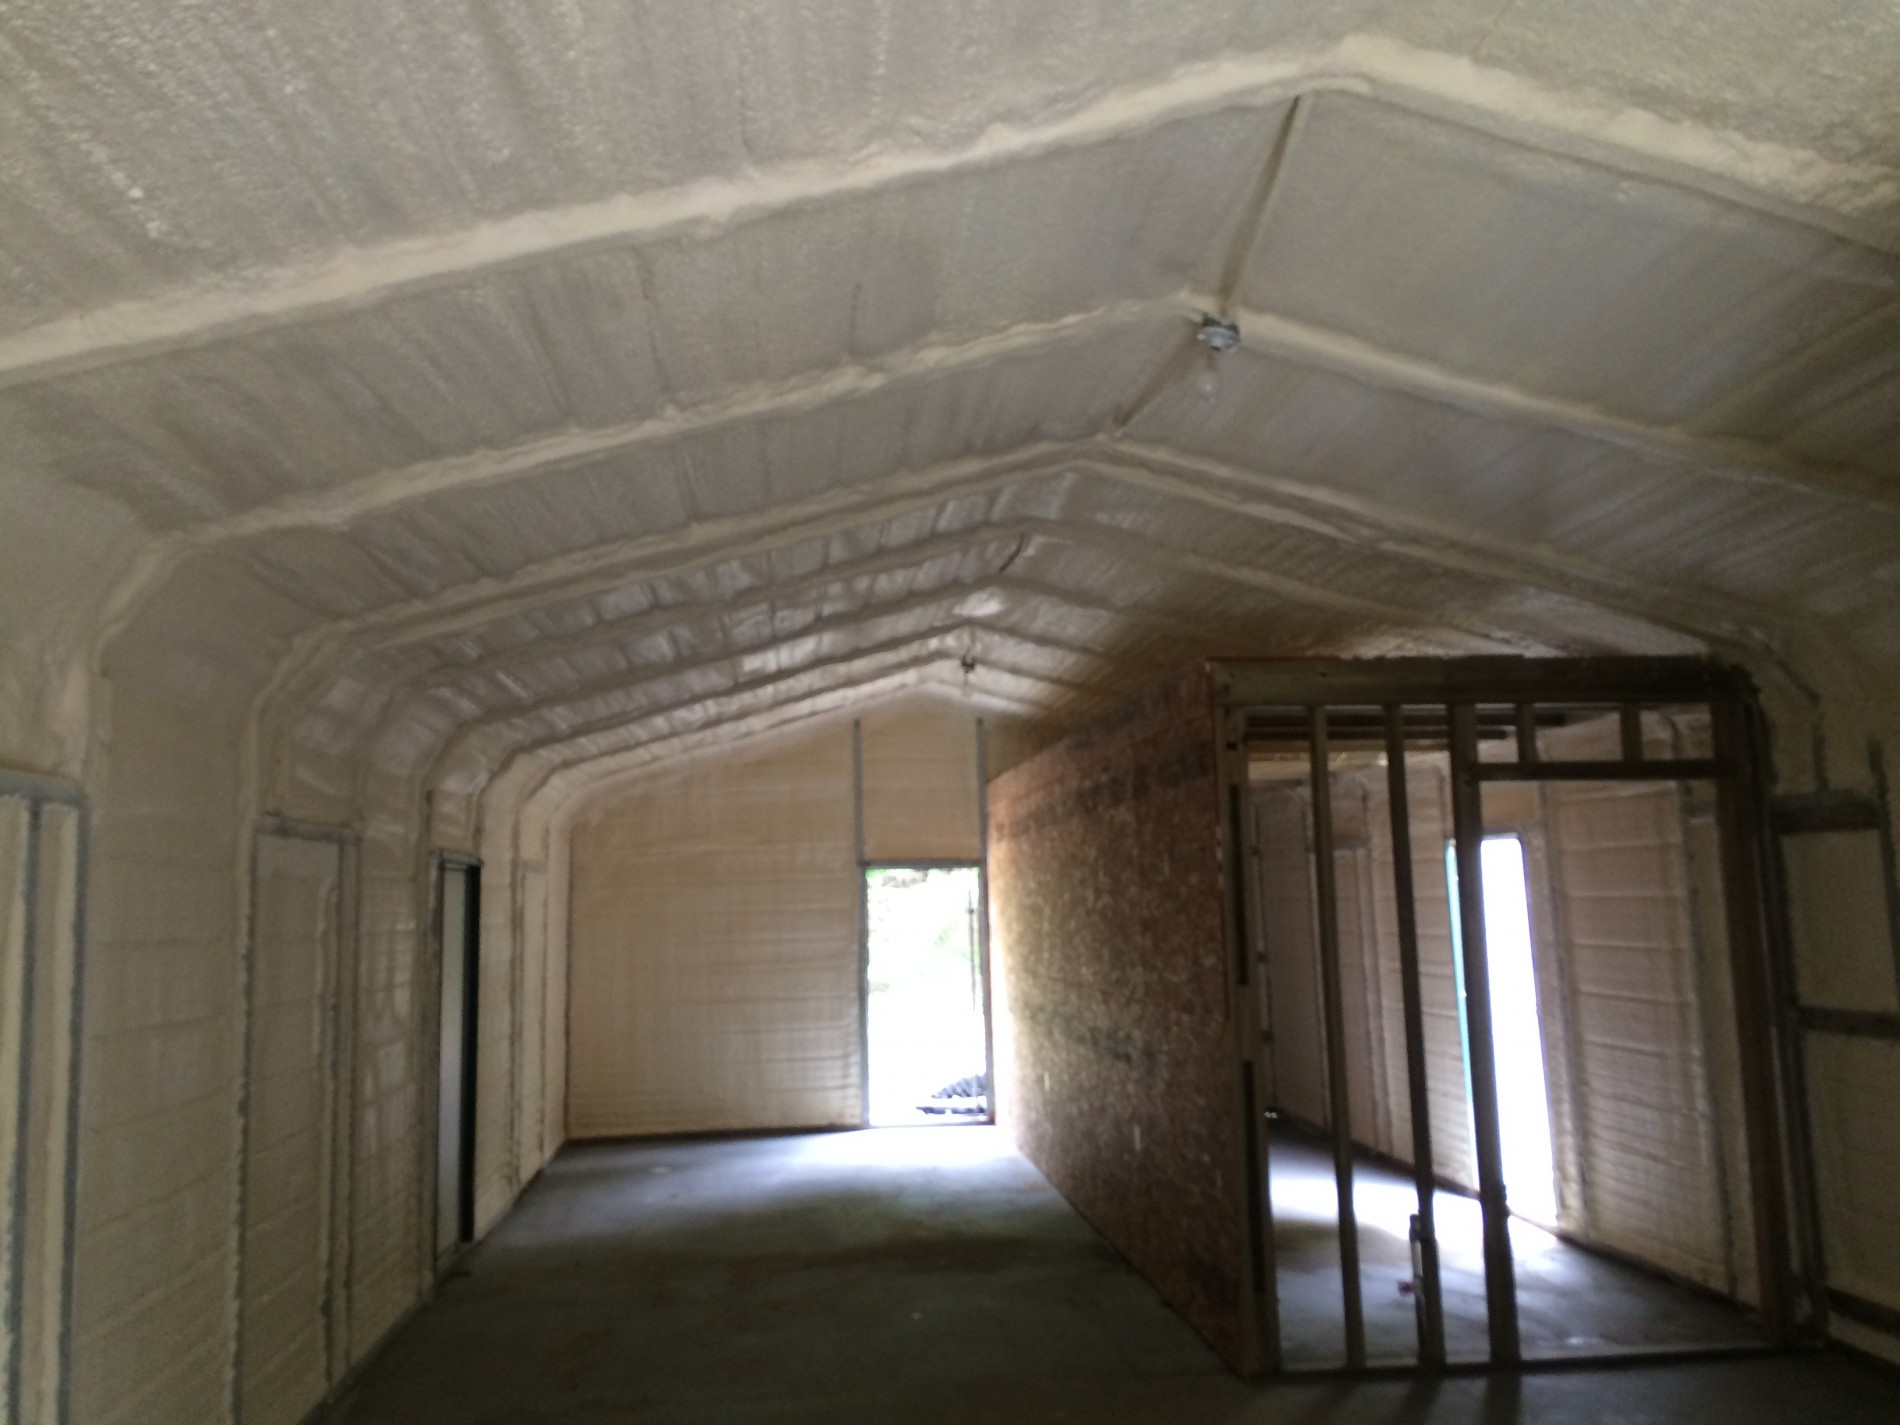 A commercial building with wall spray foam insulation.